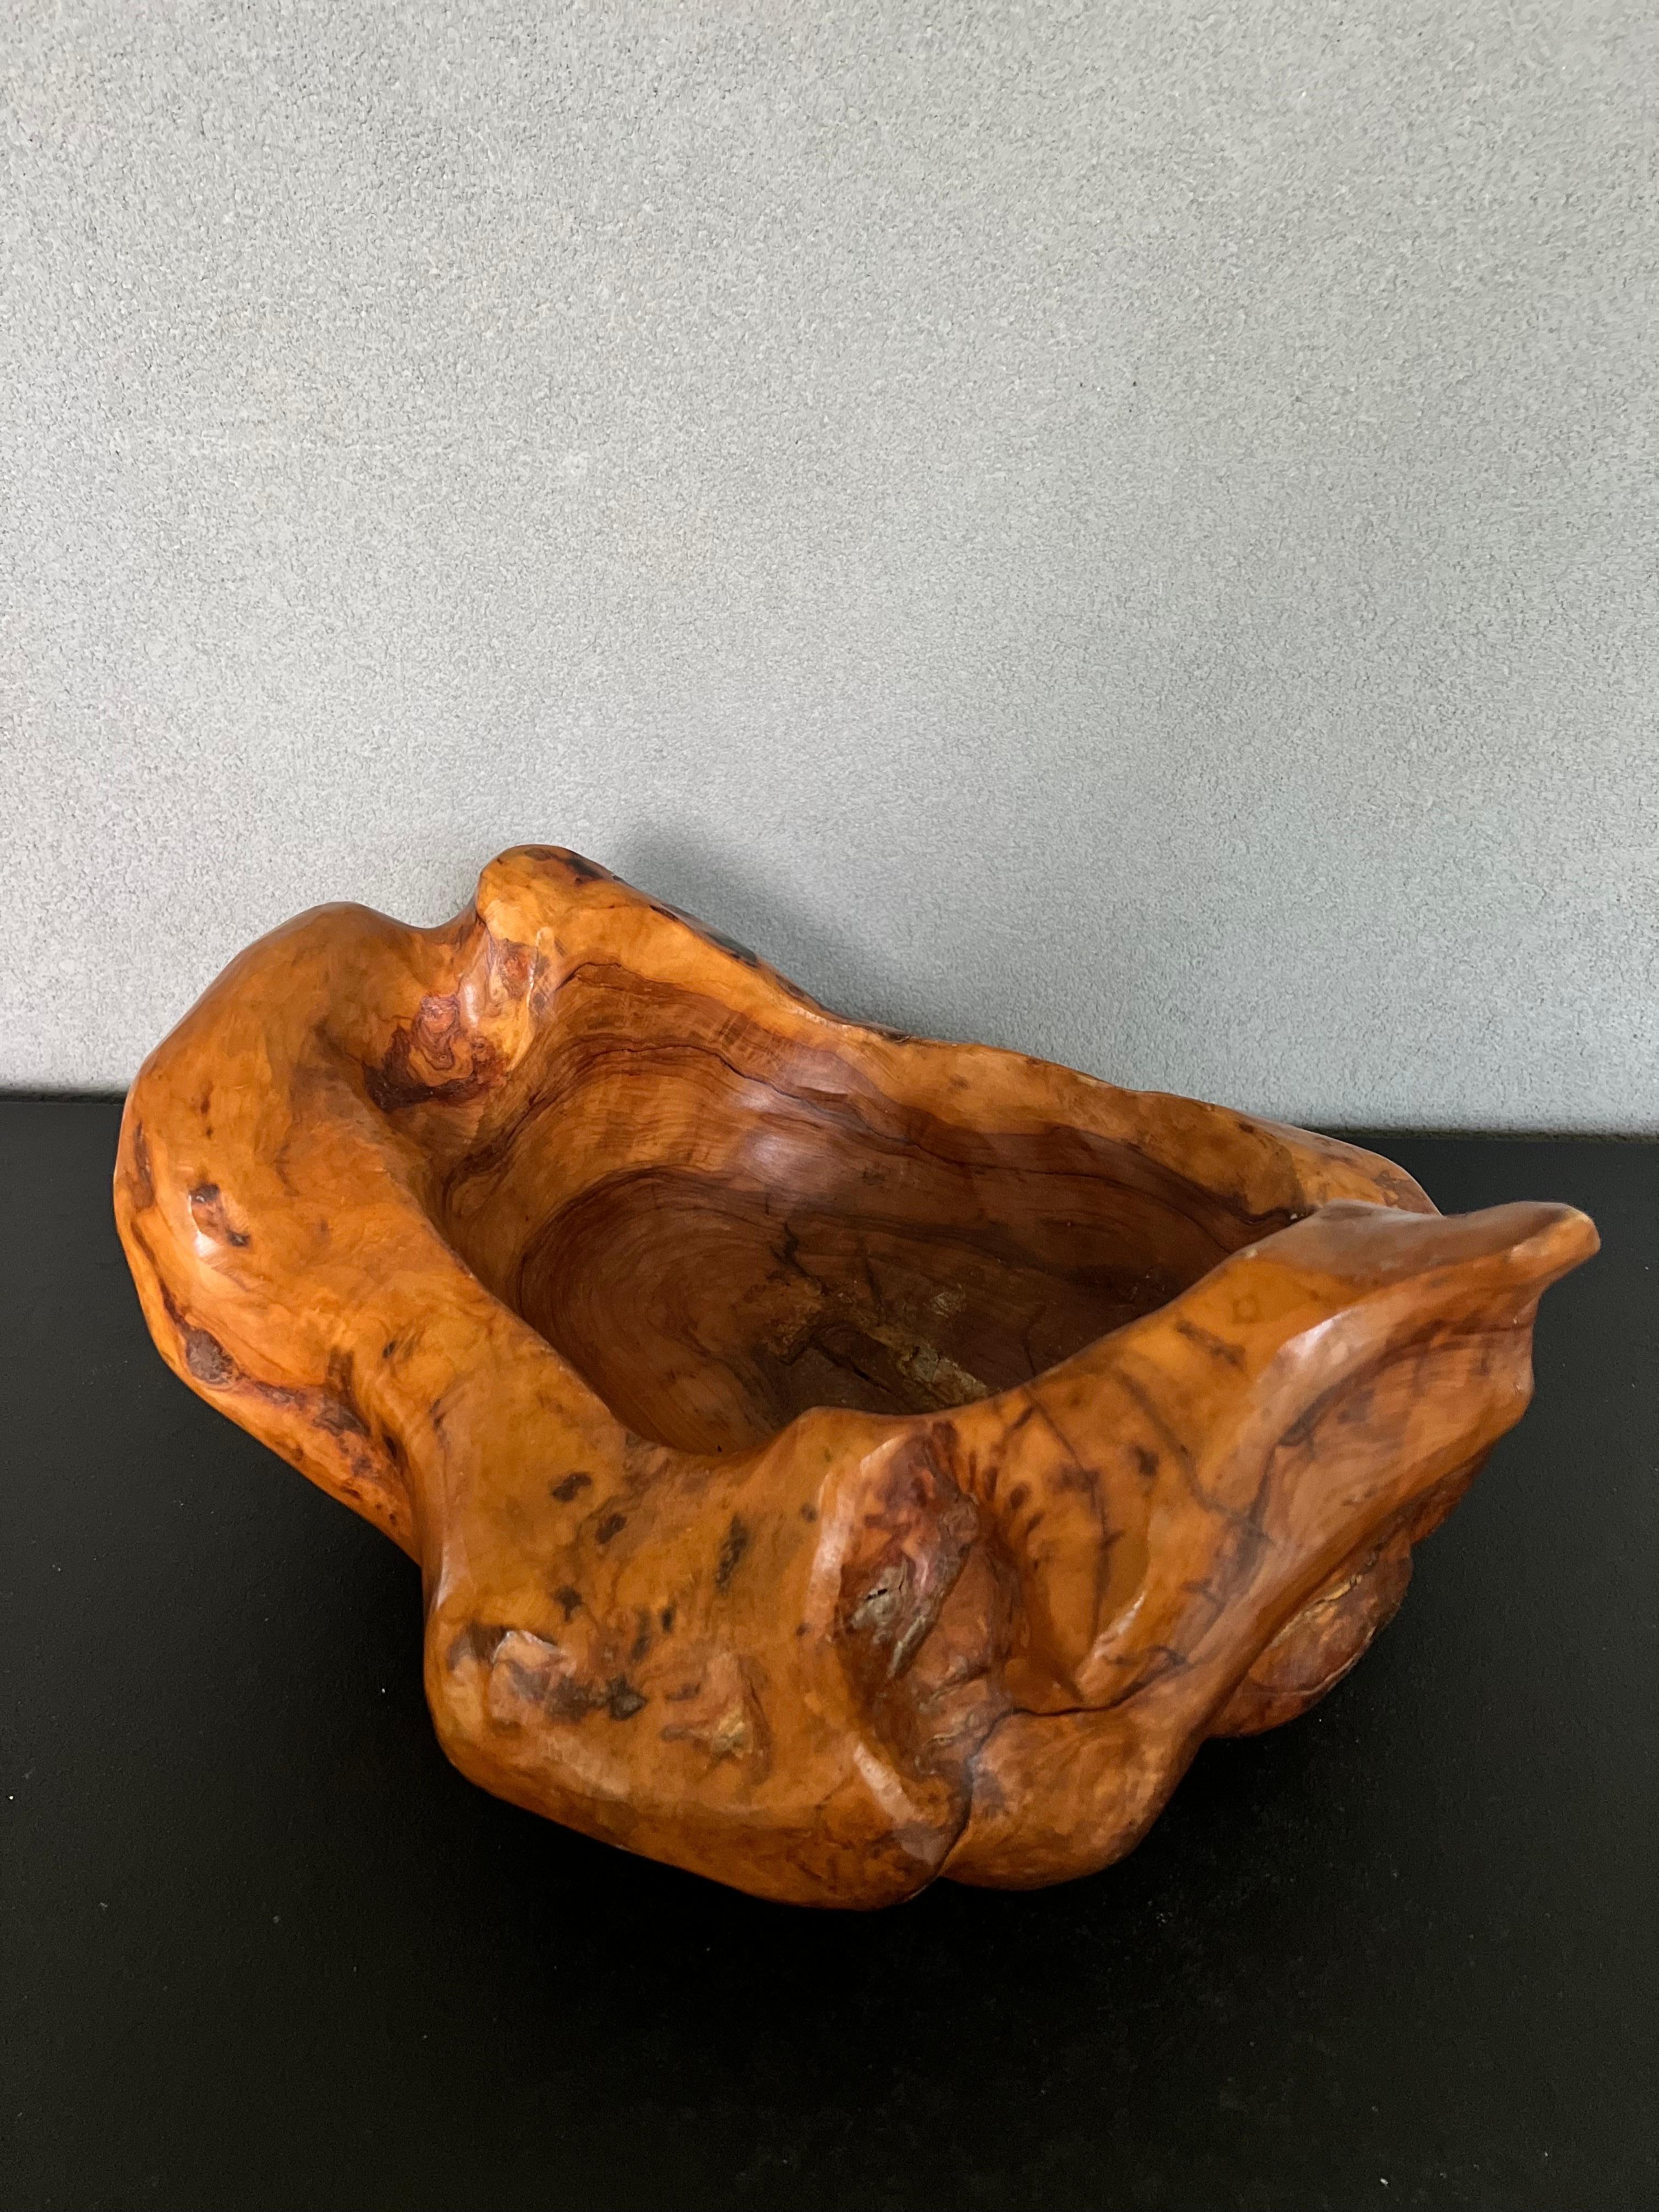 Stunning large hand-carved free form burl wood centerpiece/bowl. This piece it’s not only big and gorgeous it’s art made in a form of q bowl. It would be a statement piece in any room of your home. 
If you like unique decor this piece is for you  